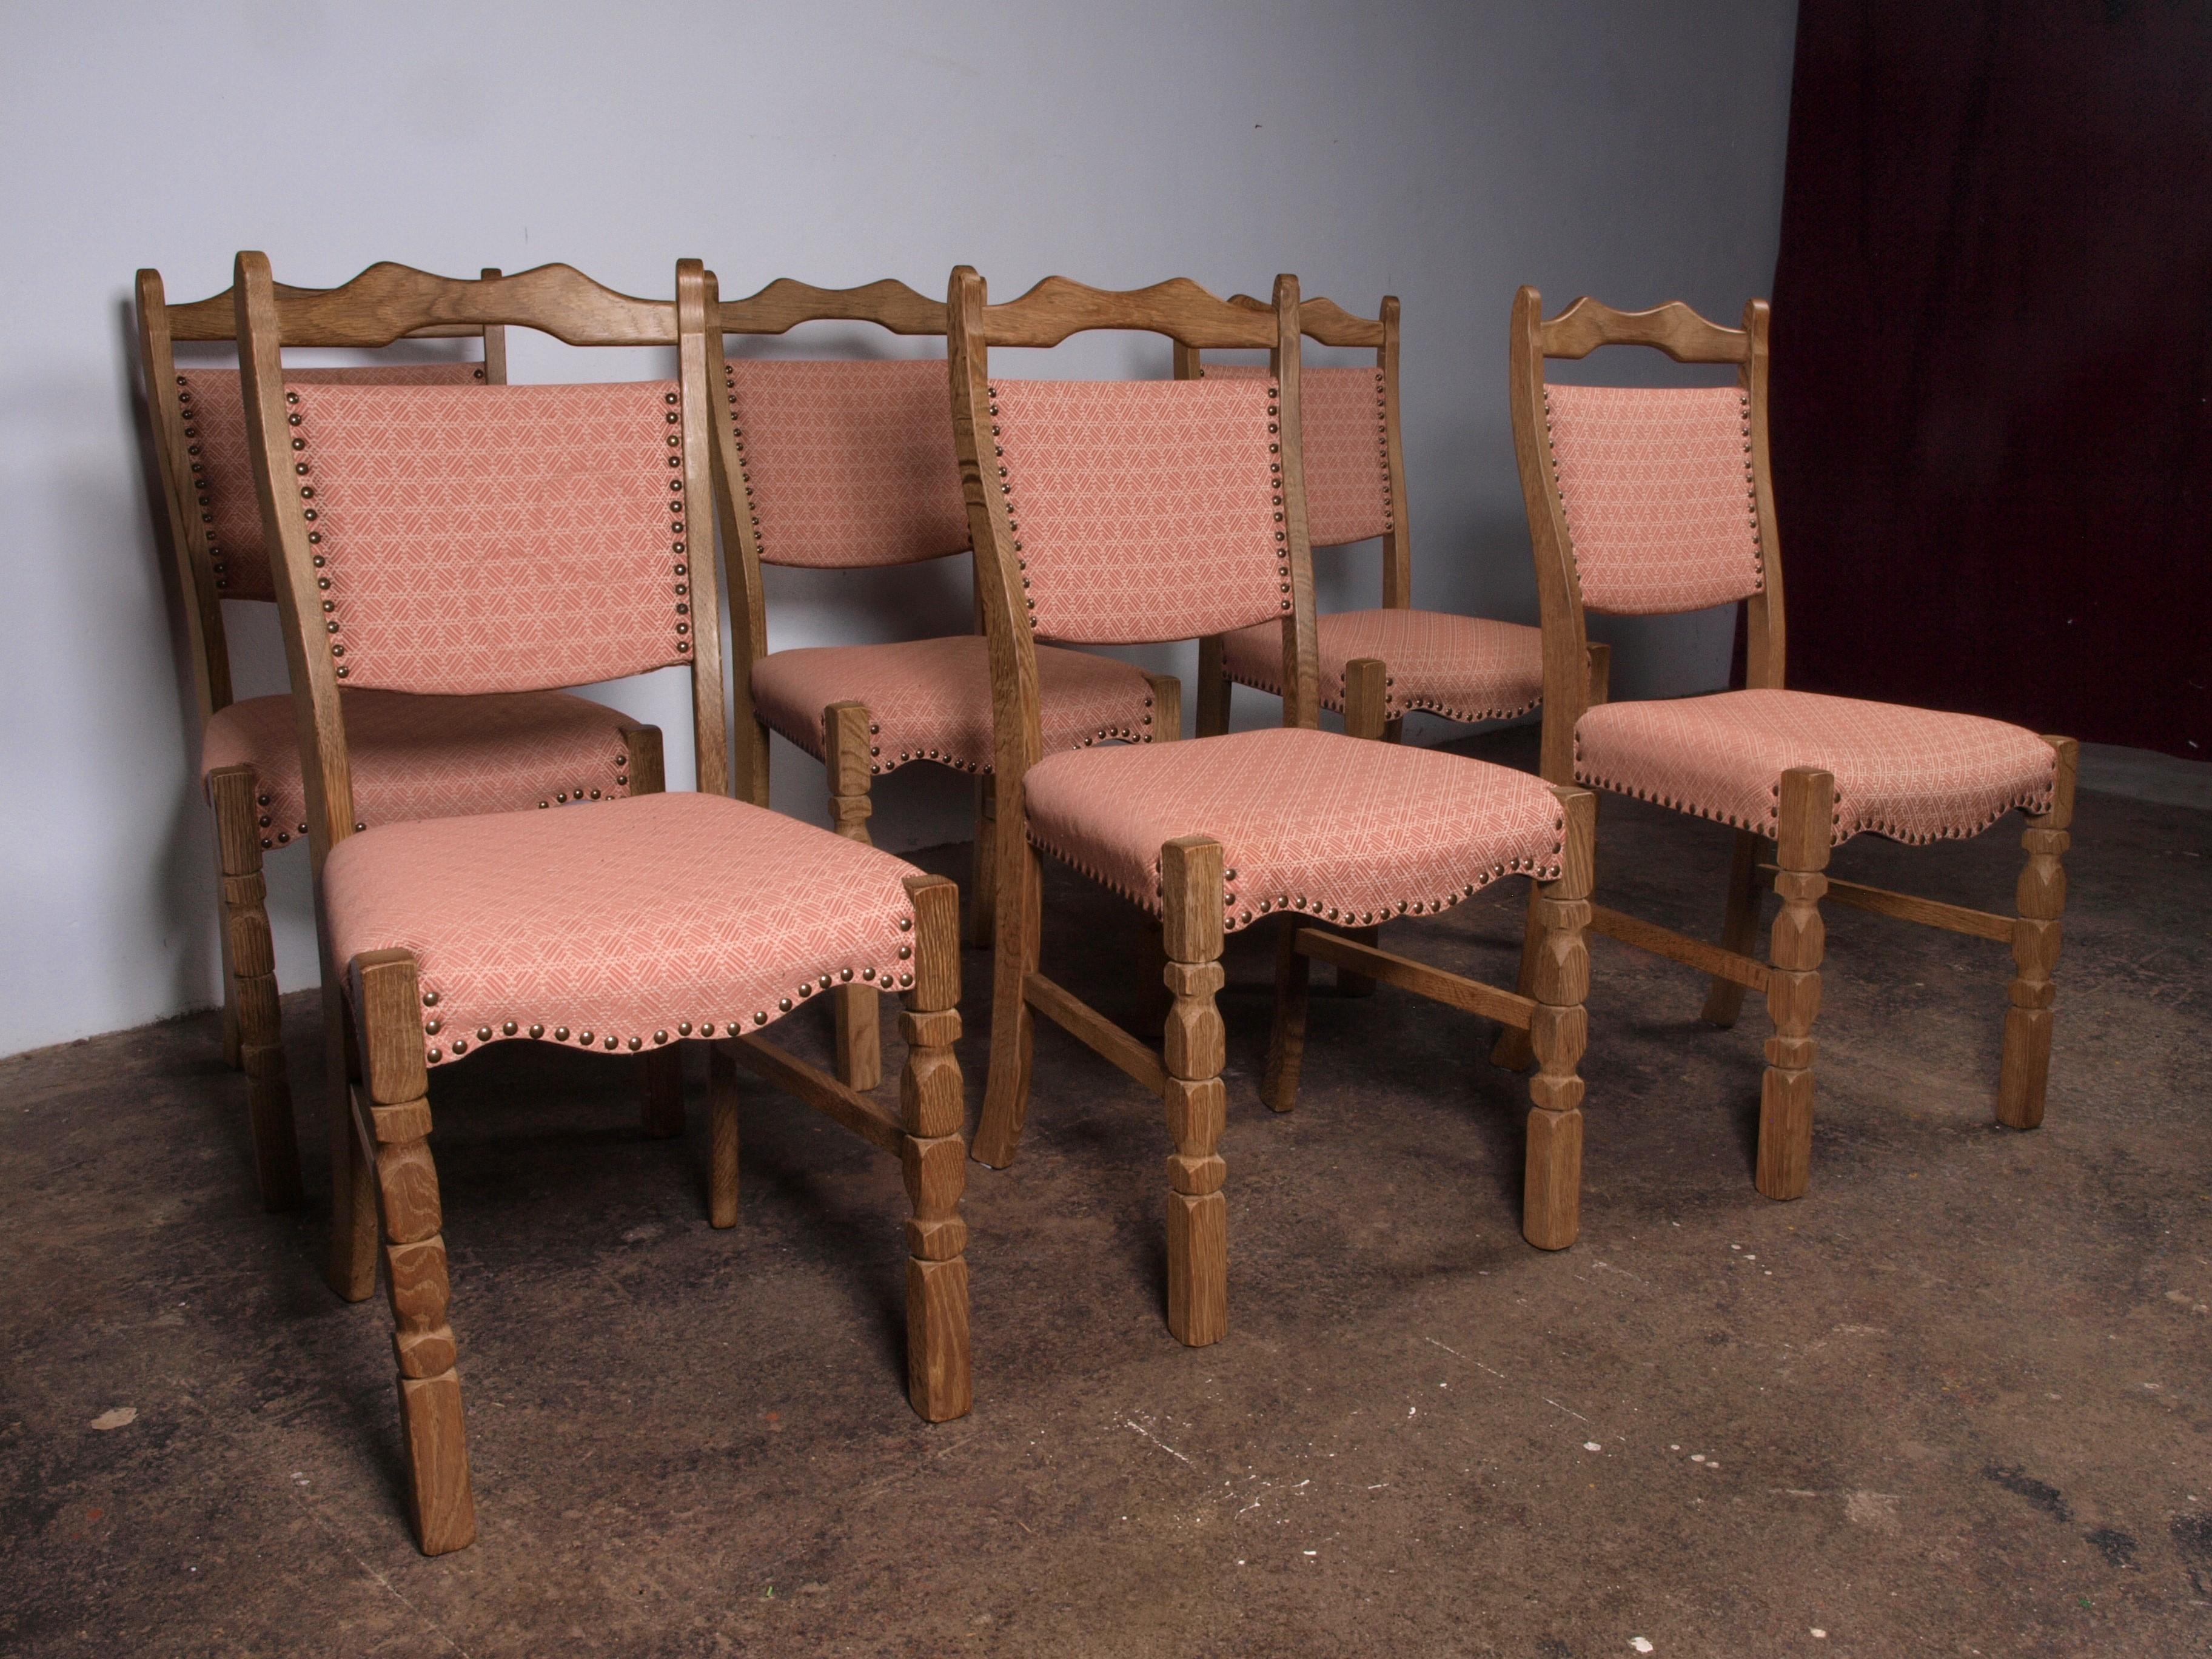 a set of 6 beautiful and well kept oak dining chairs from Denmark 1960s. They are made of solid Oak wood in the style of Henning Kjærnulf. They are all solid and firm, and the fabric is in very good condition with no stains or smell.

Can be shipped